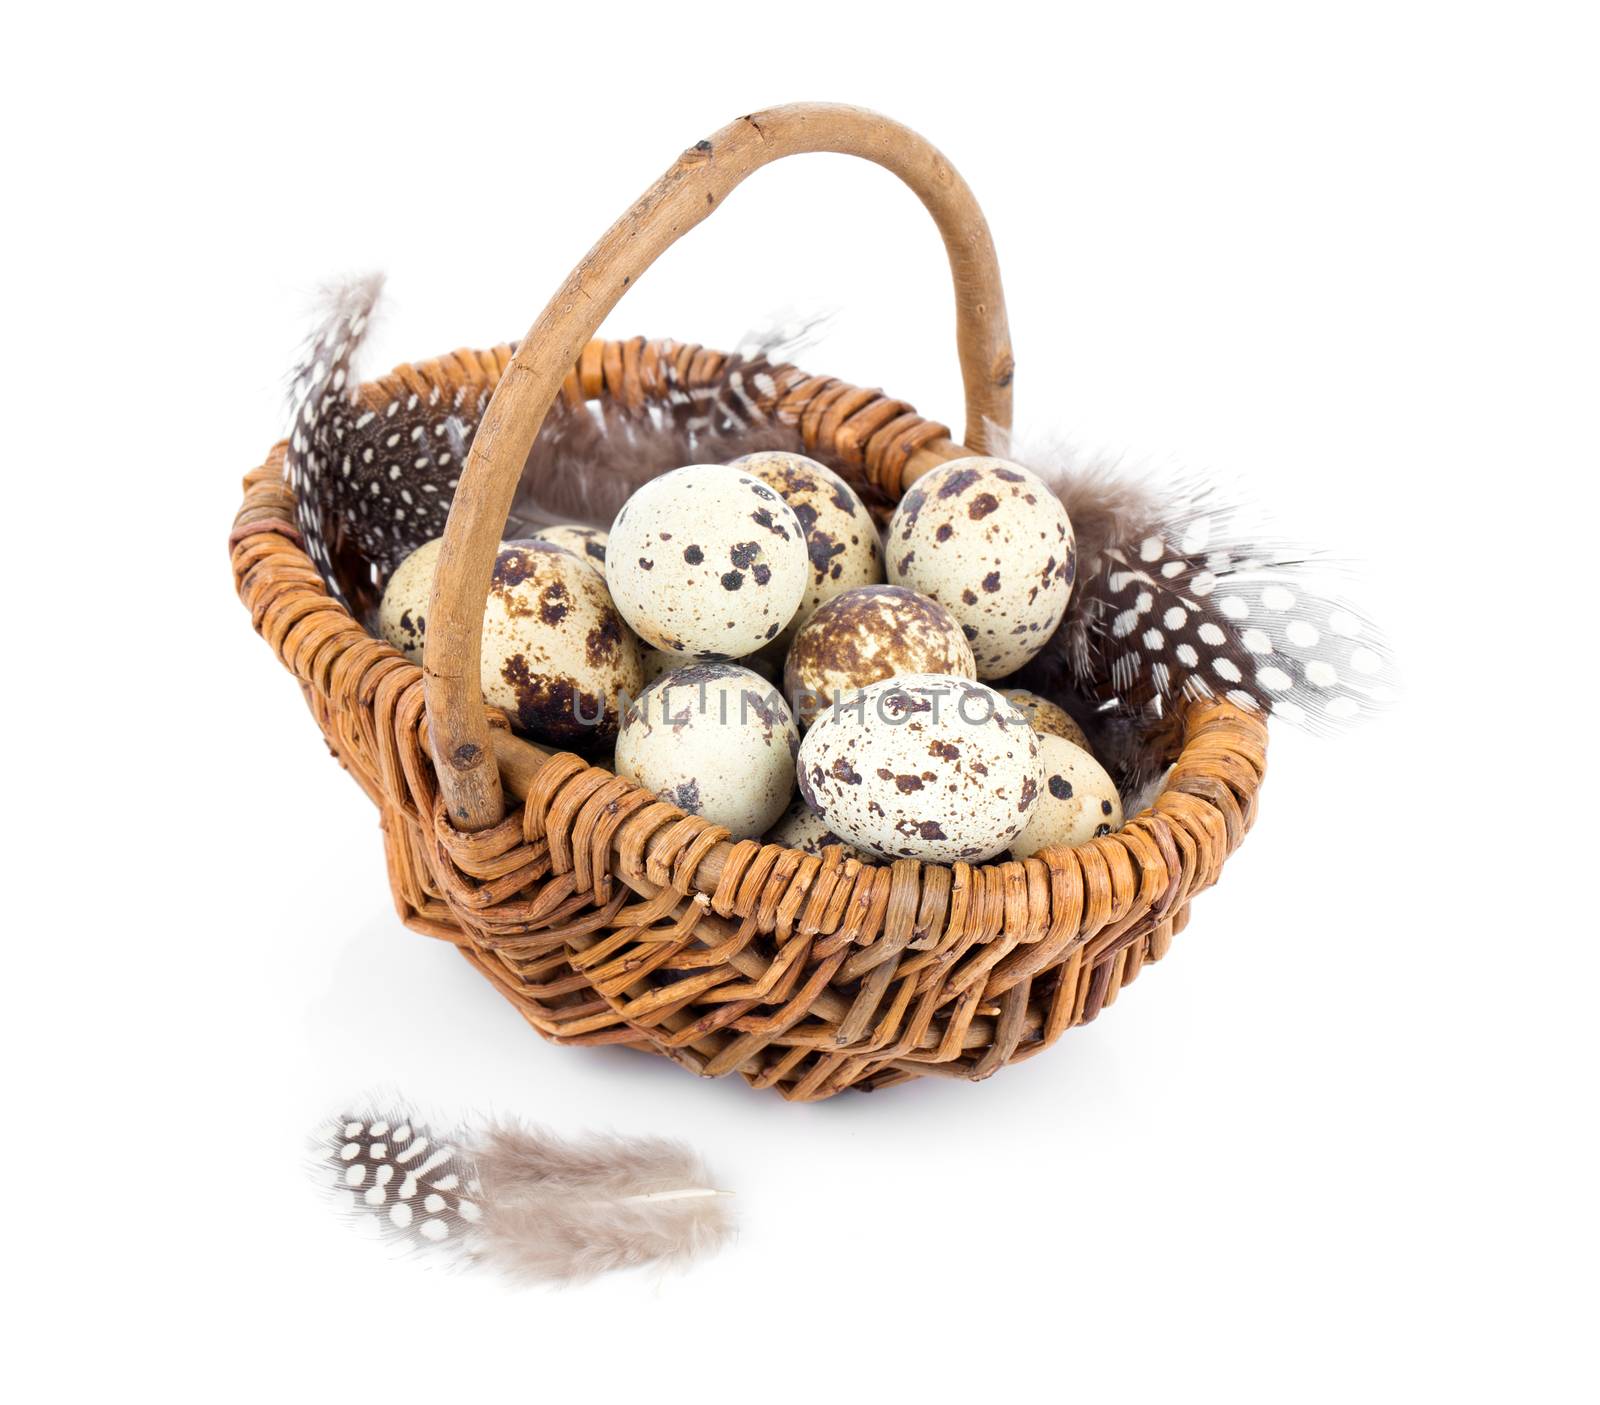 quail eggs in a wicker basket on white background